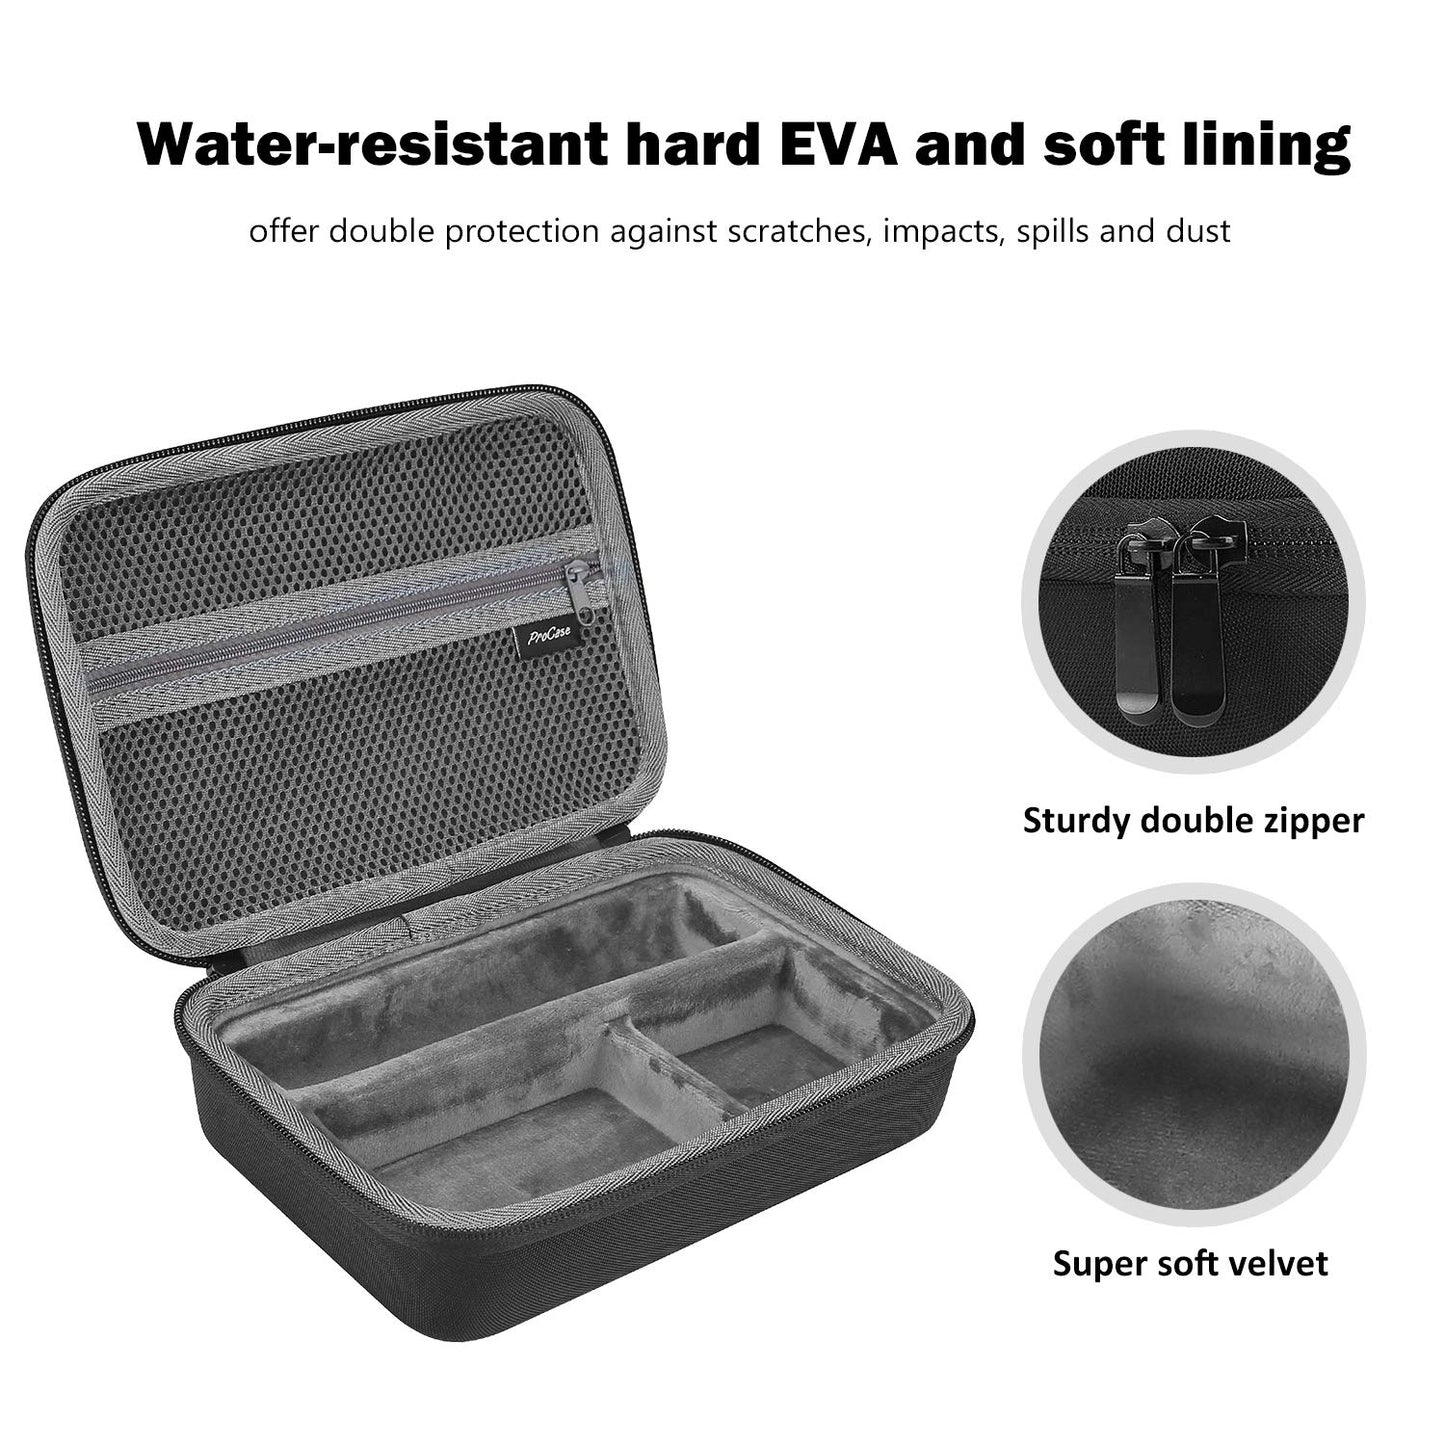 ProCase Hard Travel Case for Multigroom Series 3000 5000 7000 MG3750 MG5750/49 MG7750/49 Men's Electric Trimmer Shaver and Attachments Father's Day Gift -Black